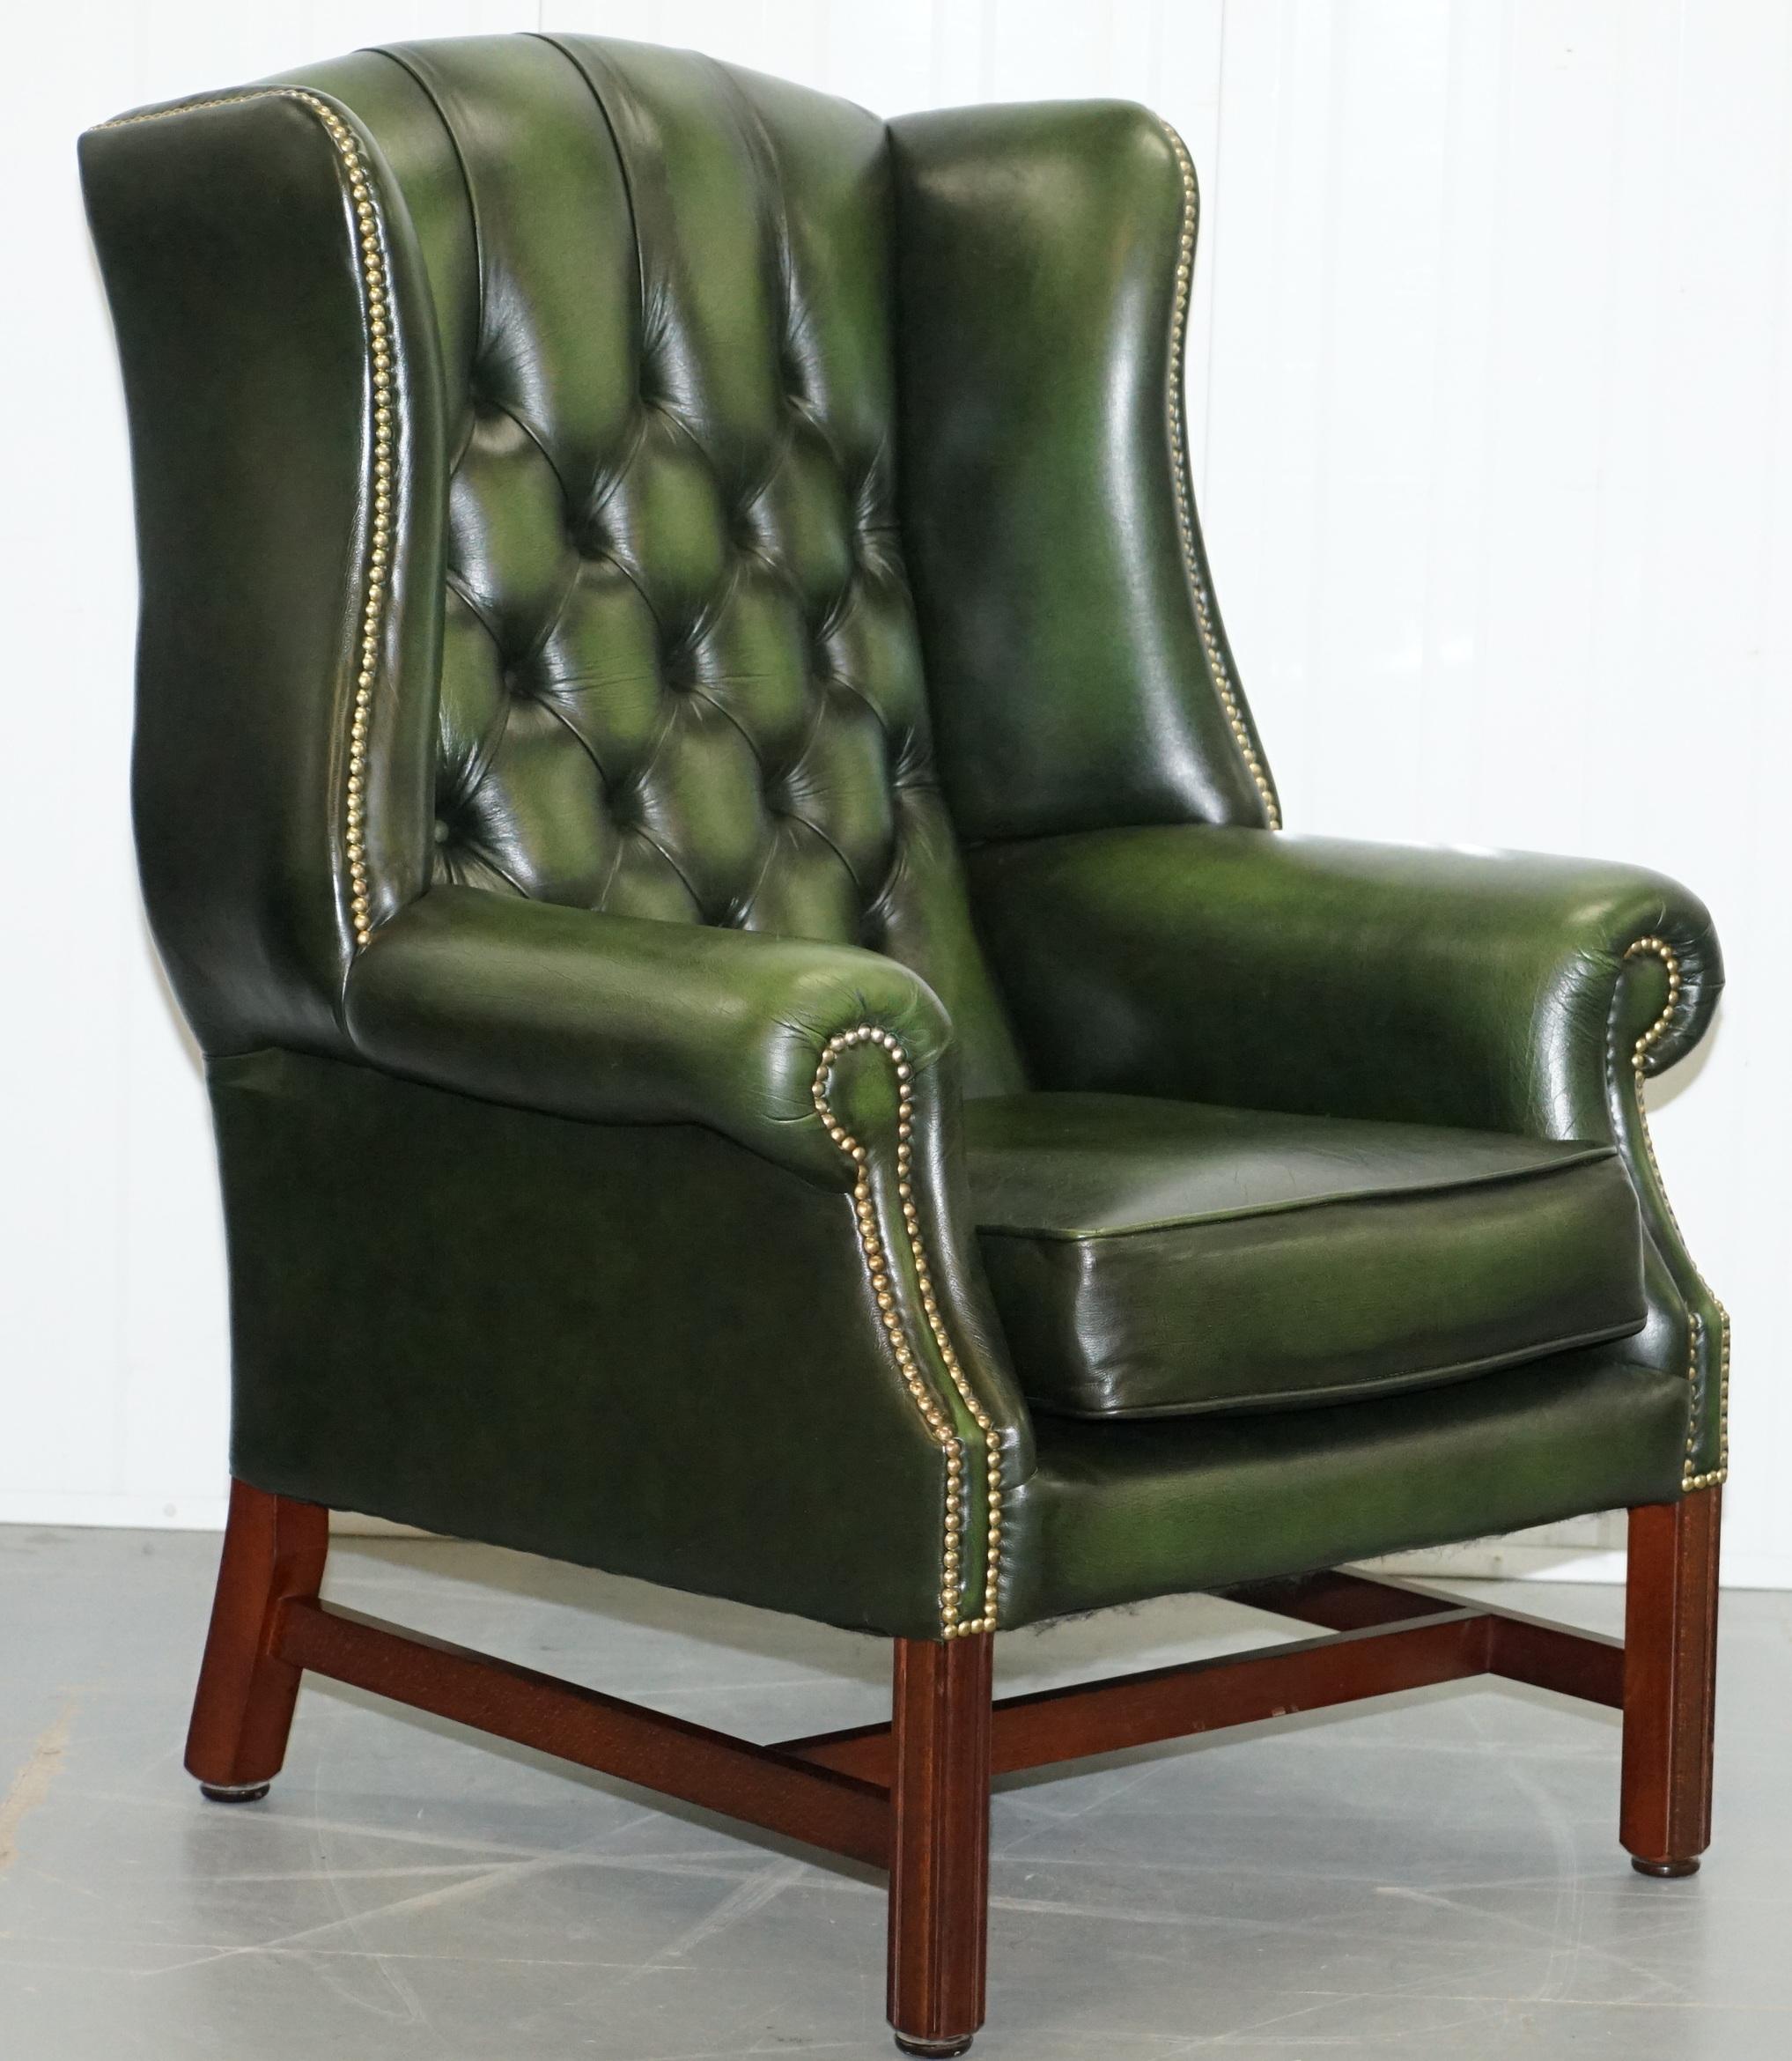 We are delighted to offer for sale this lovely pair of high-end luxury aged green leather Chesterfield Wingback armchairs and matching footstool

A very good looking and lightly used pair, these are larger than standard wingbacks and have a